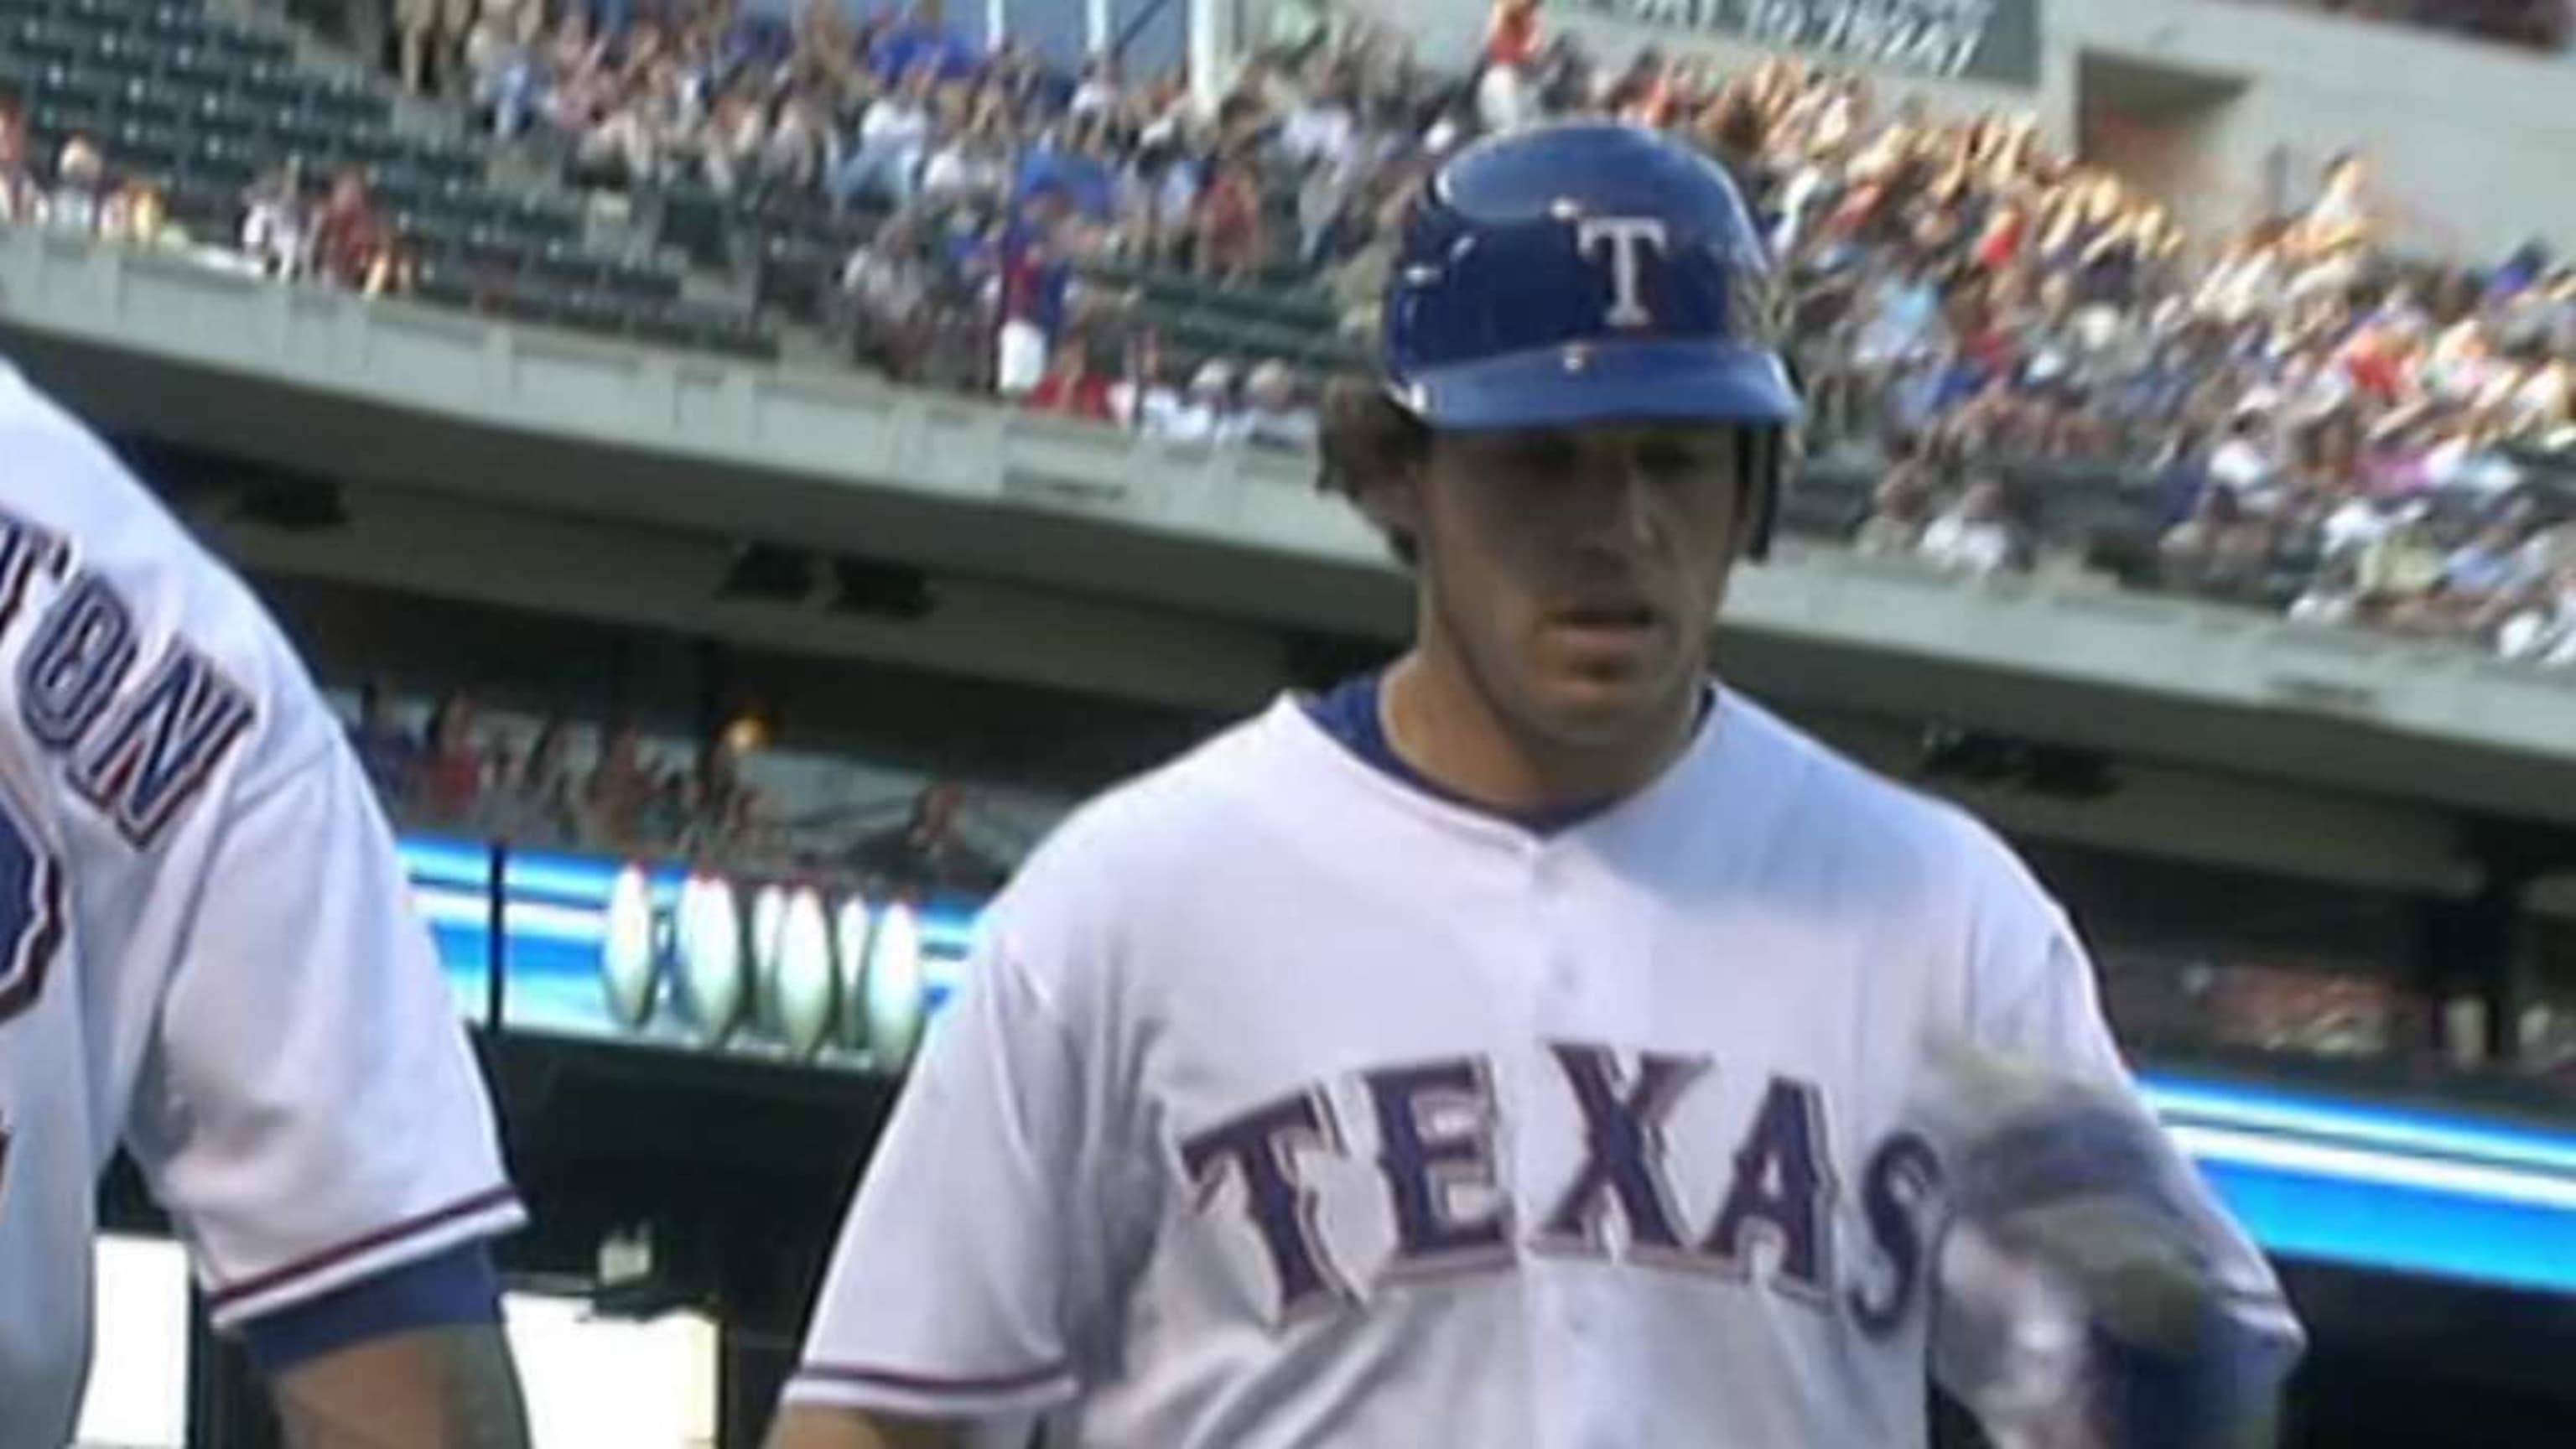 Texas Rangers great Ian Kinsler throws out first pitch wearing